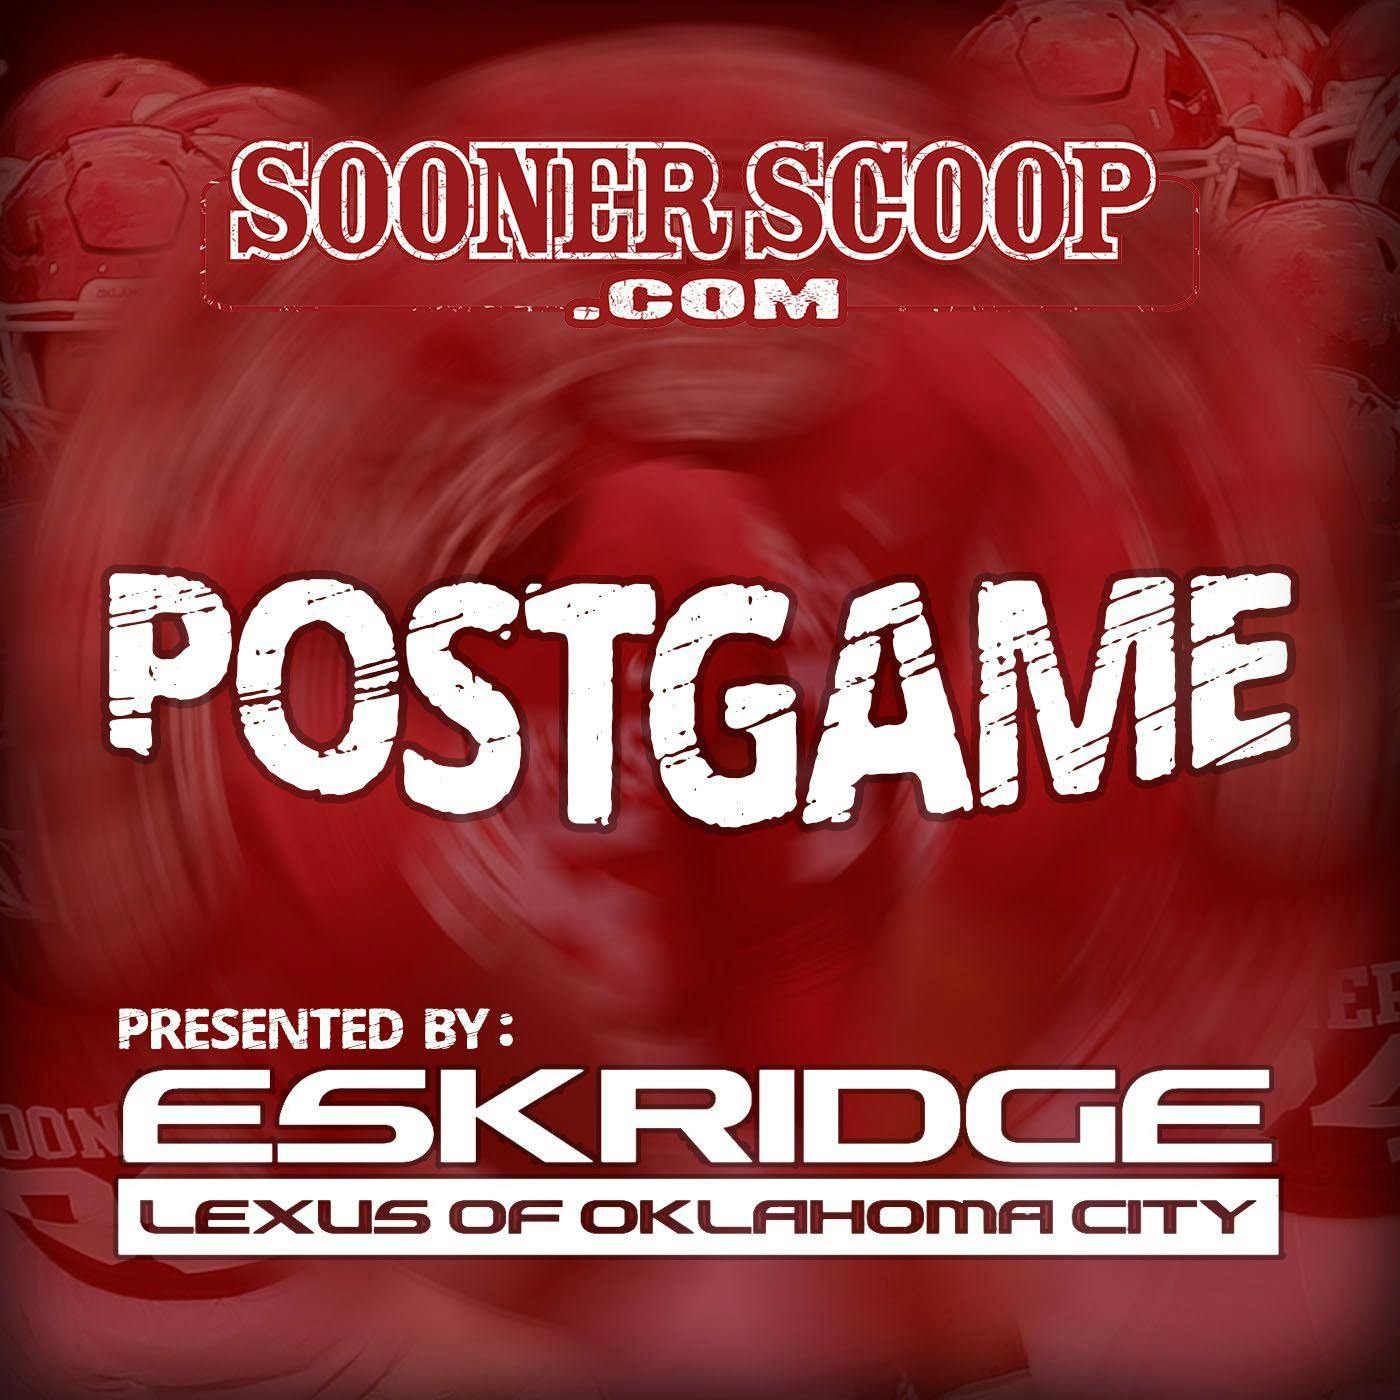 Postgame: Looking for answers as to why OU can't take it to the next level